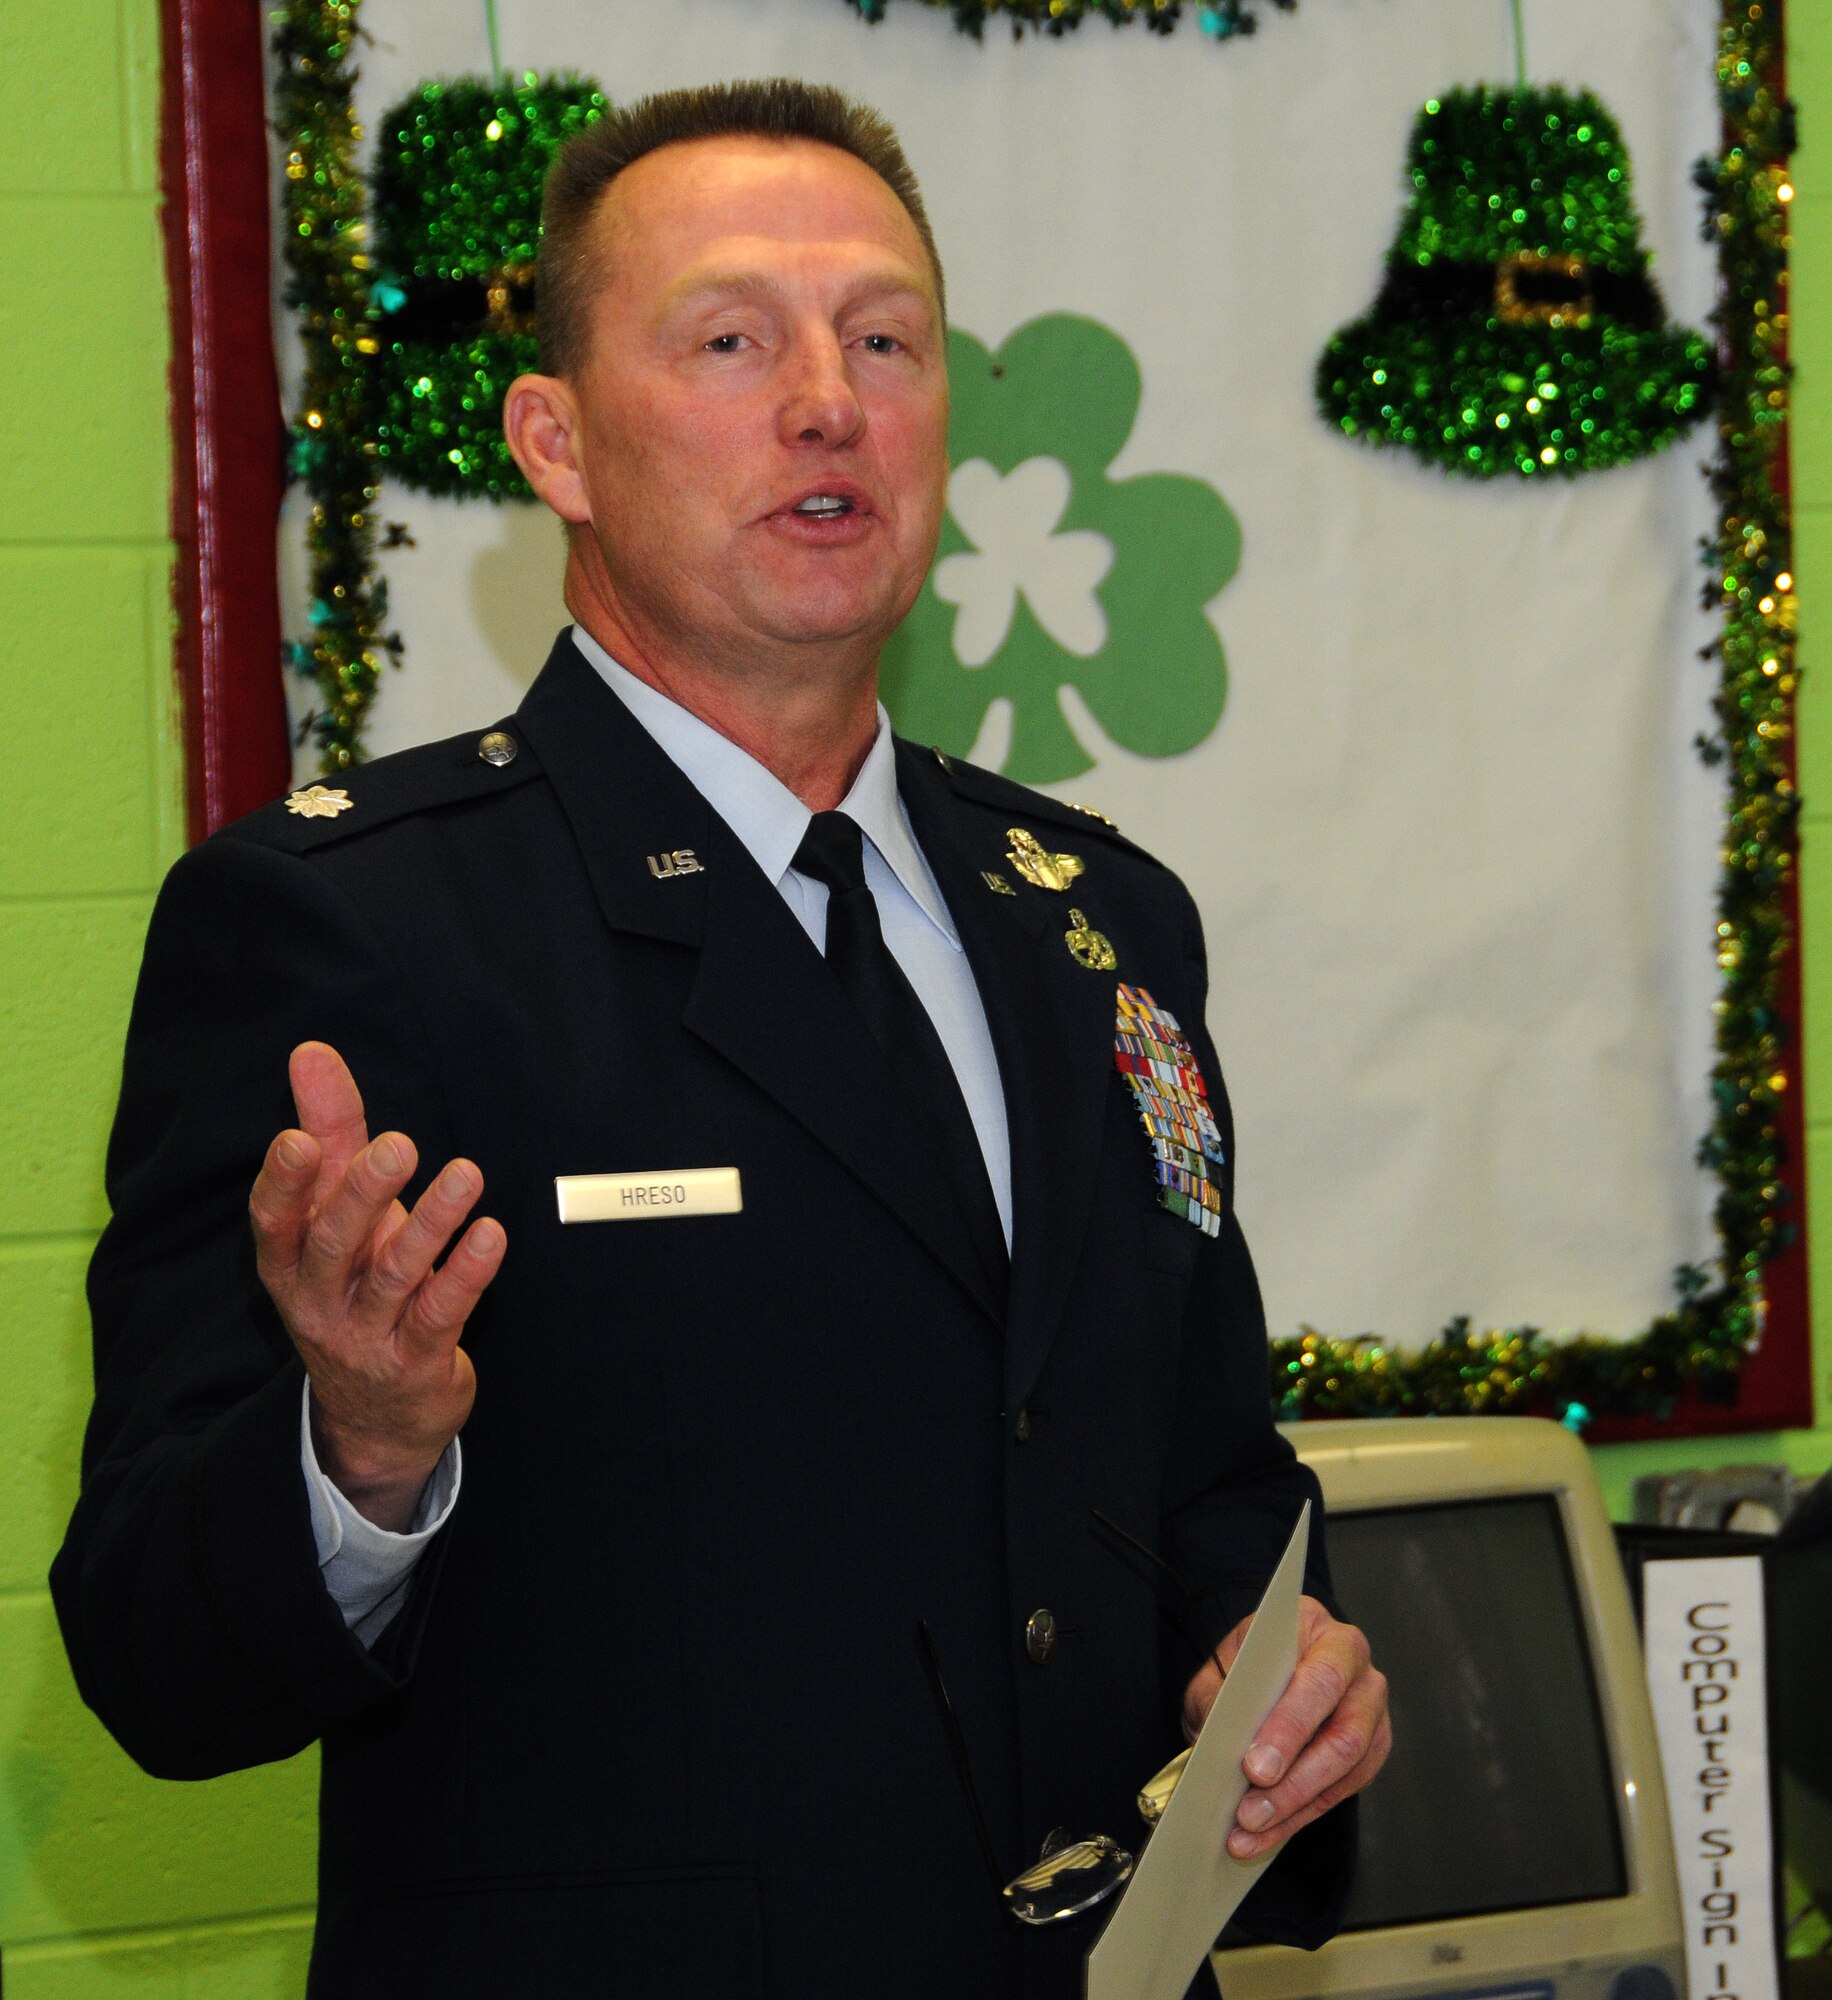 Lt. Col. Scott Hreso, vice-air commander of the 111th Fighter Wing, speaks to a standing room only audience on Feb. 23 at the 18th annual O.V. Catto Memorial Ceremony held at the Star Gardens Recreation Center at 6th and Lombard streets in
Philadelphia. Hreso spoke to the attendees about the positive leadership and commitment Catto demonstrated nearly 150 years ago.